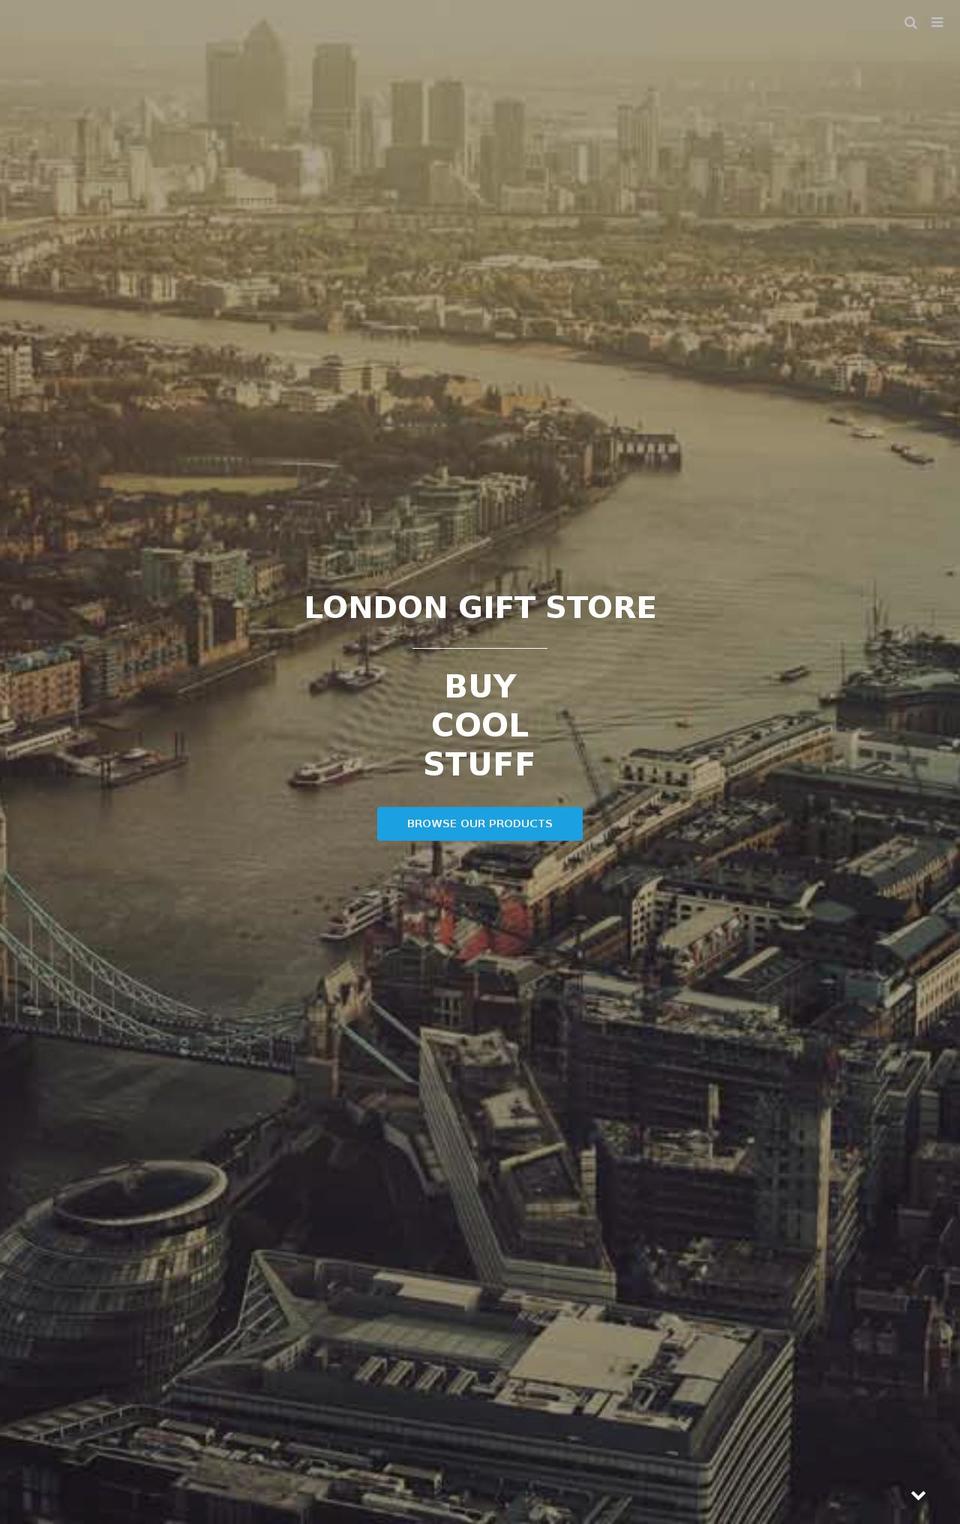 California Shopify theme site example londongiftstore.com